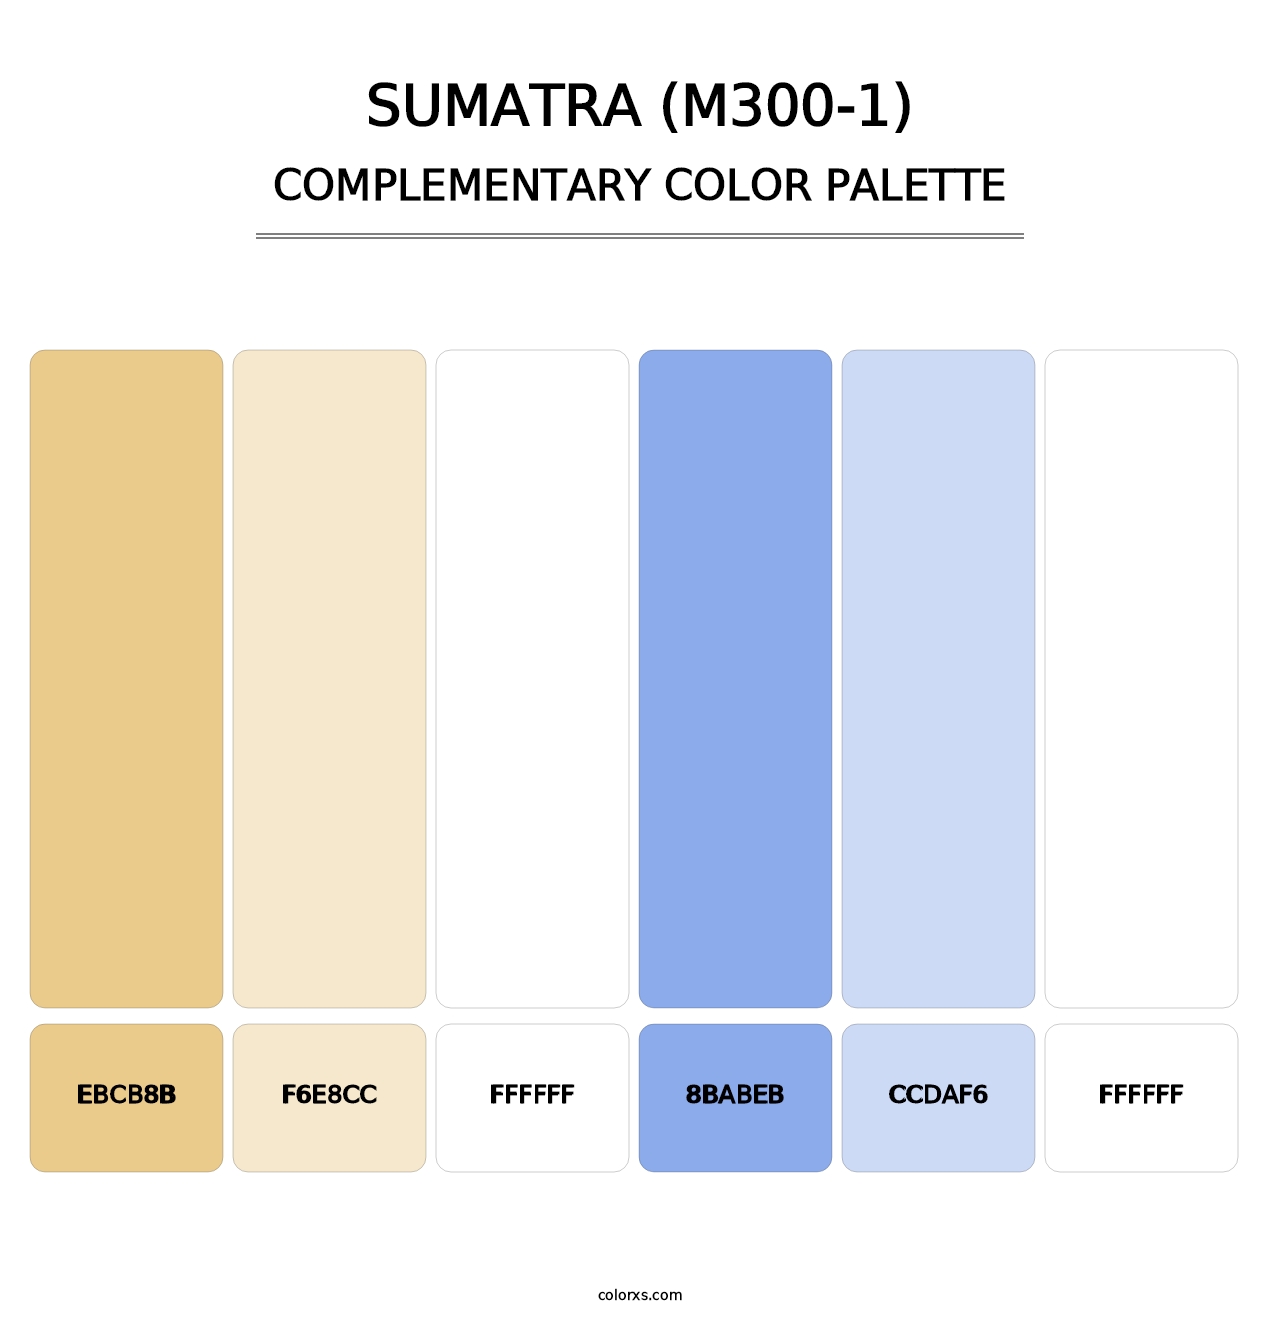 Sumatra (M300-1) - Complementary Color Palette